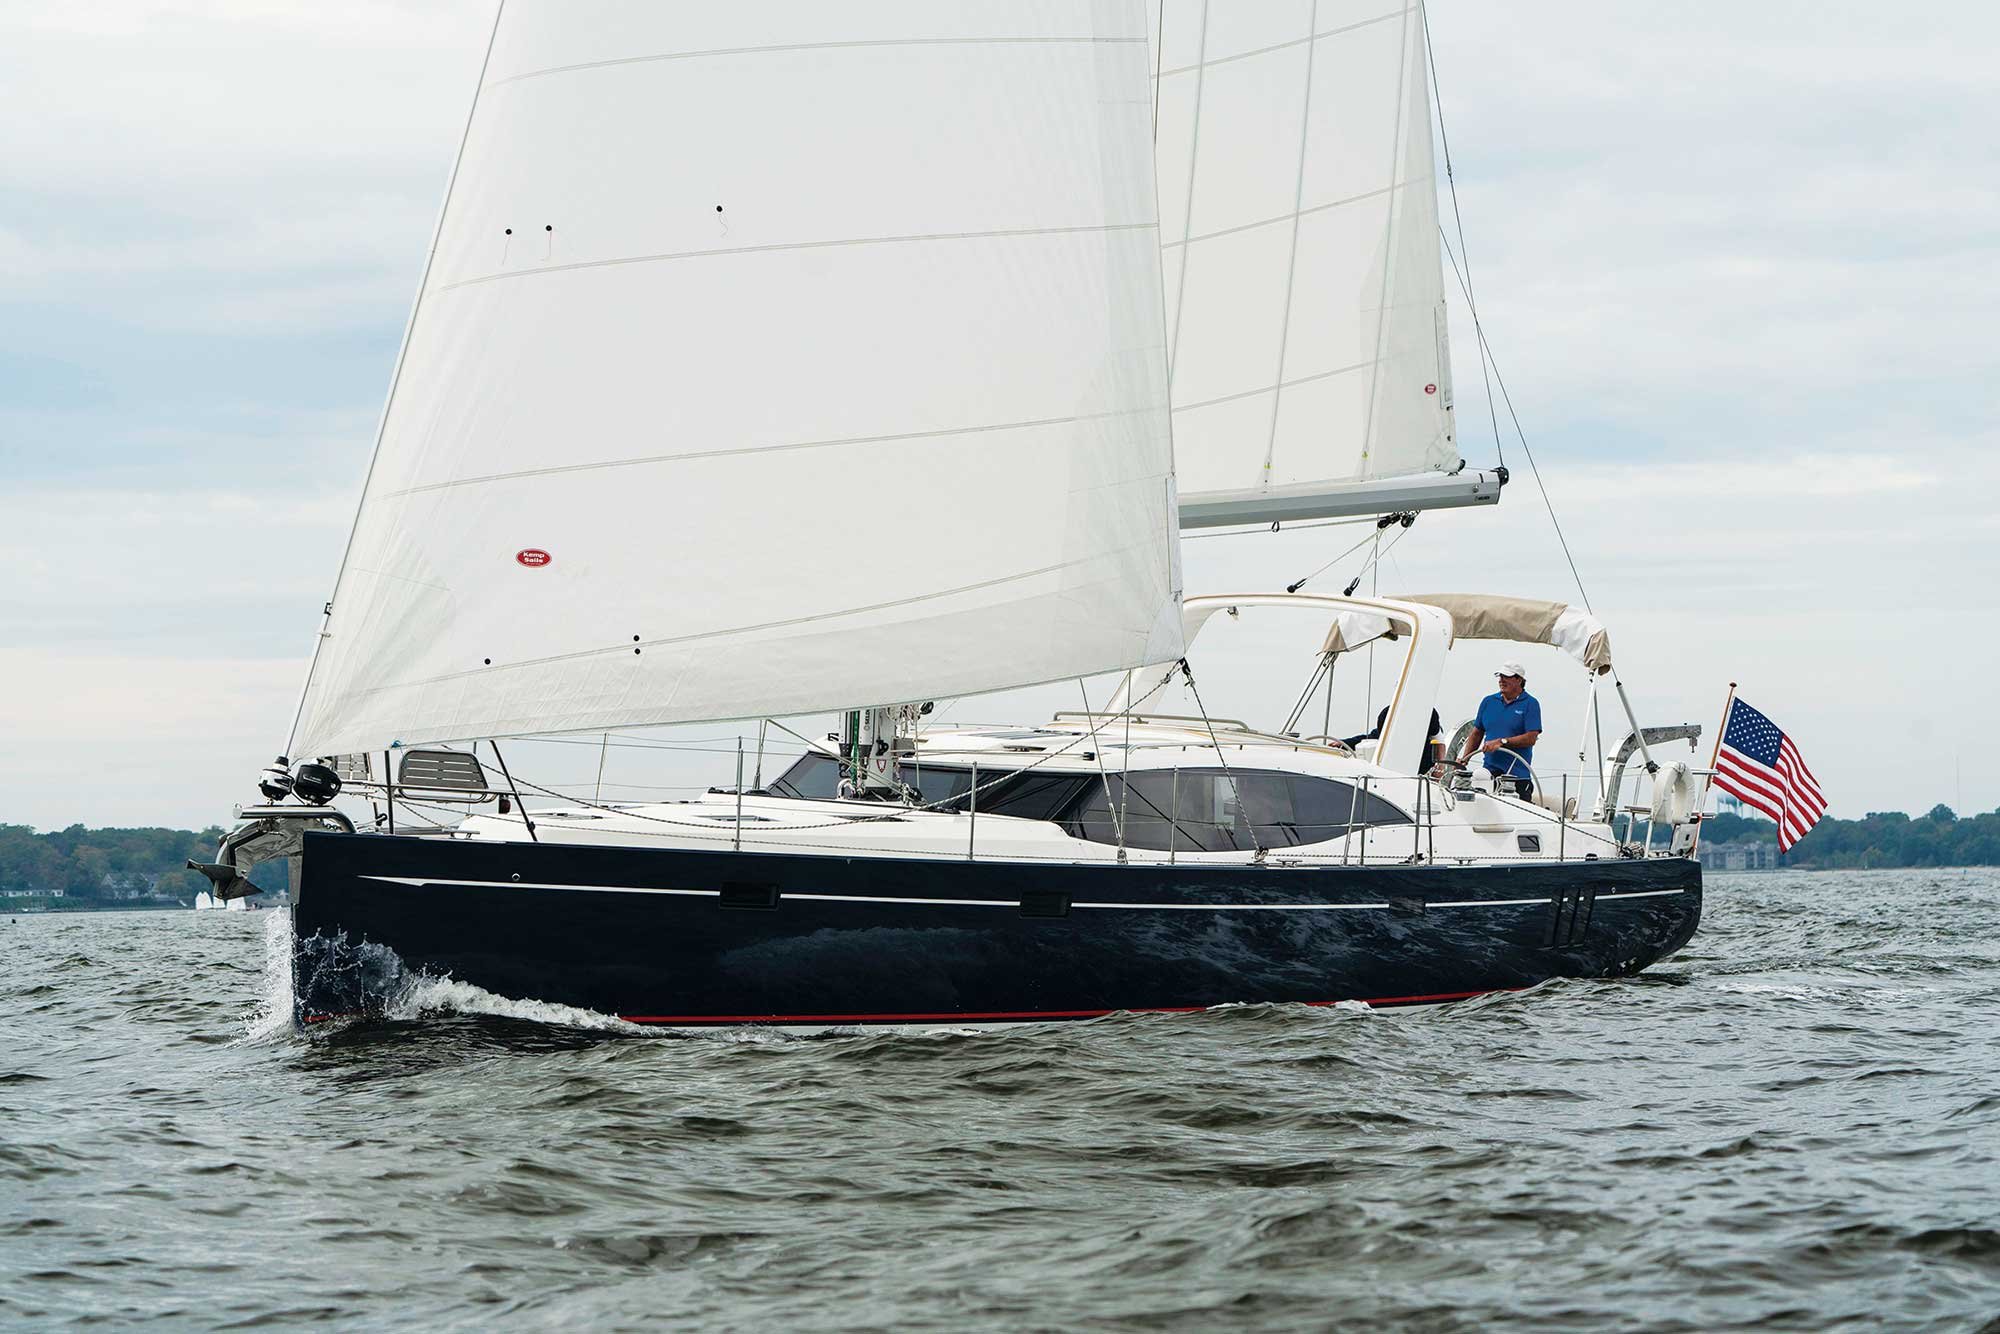 5 New Sailboats That Were Nominees